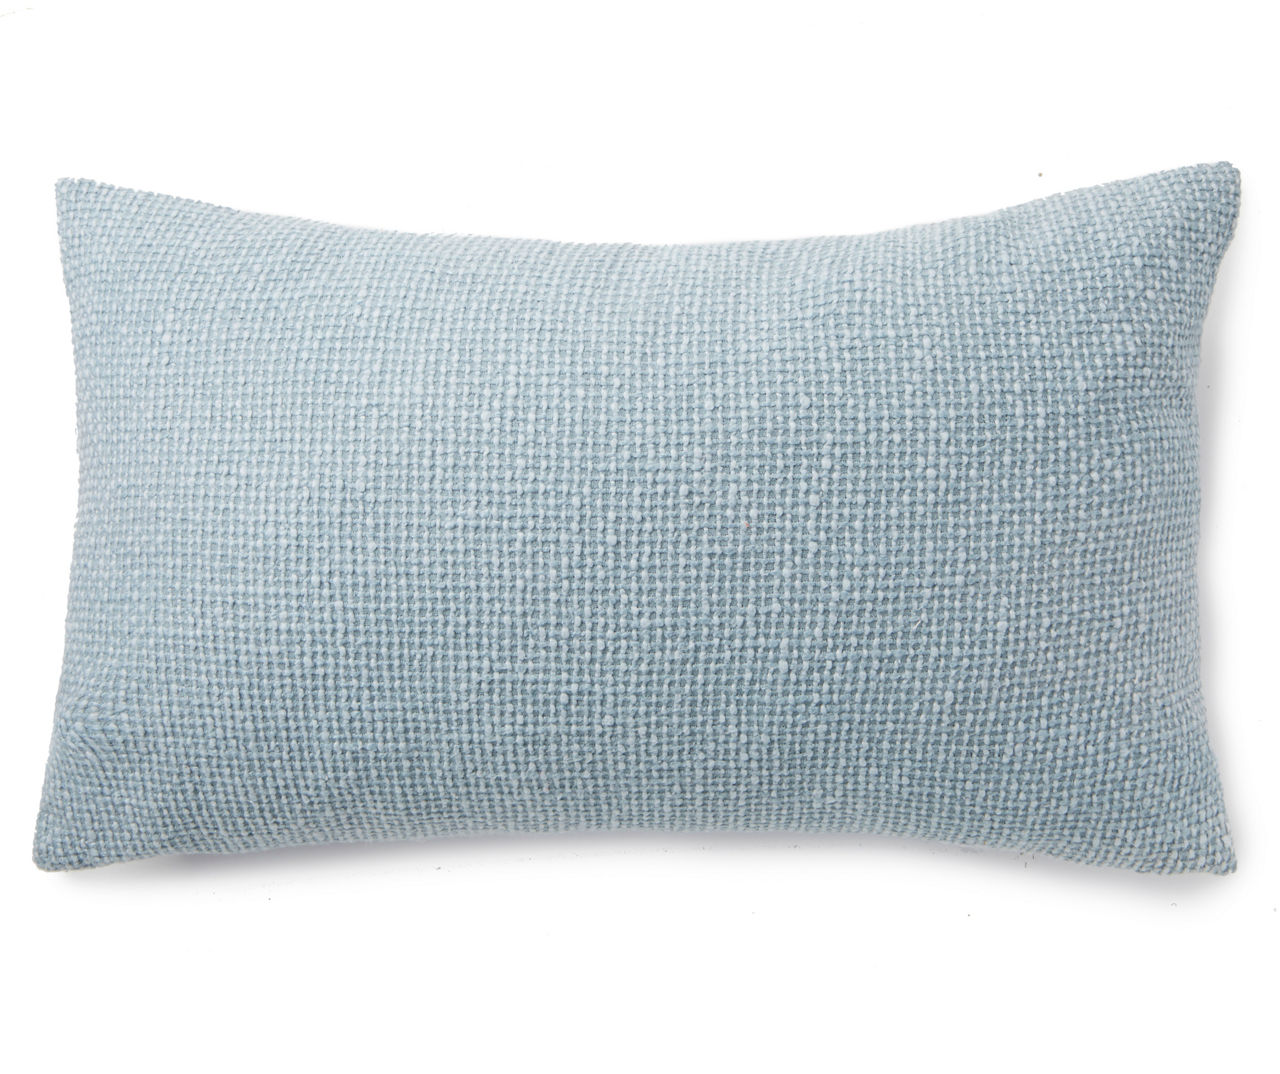 Colorful Throw Pillows, Blue Lumbar Back Support Pillows for Bed